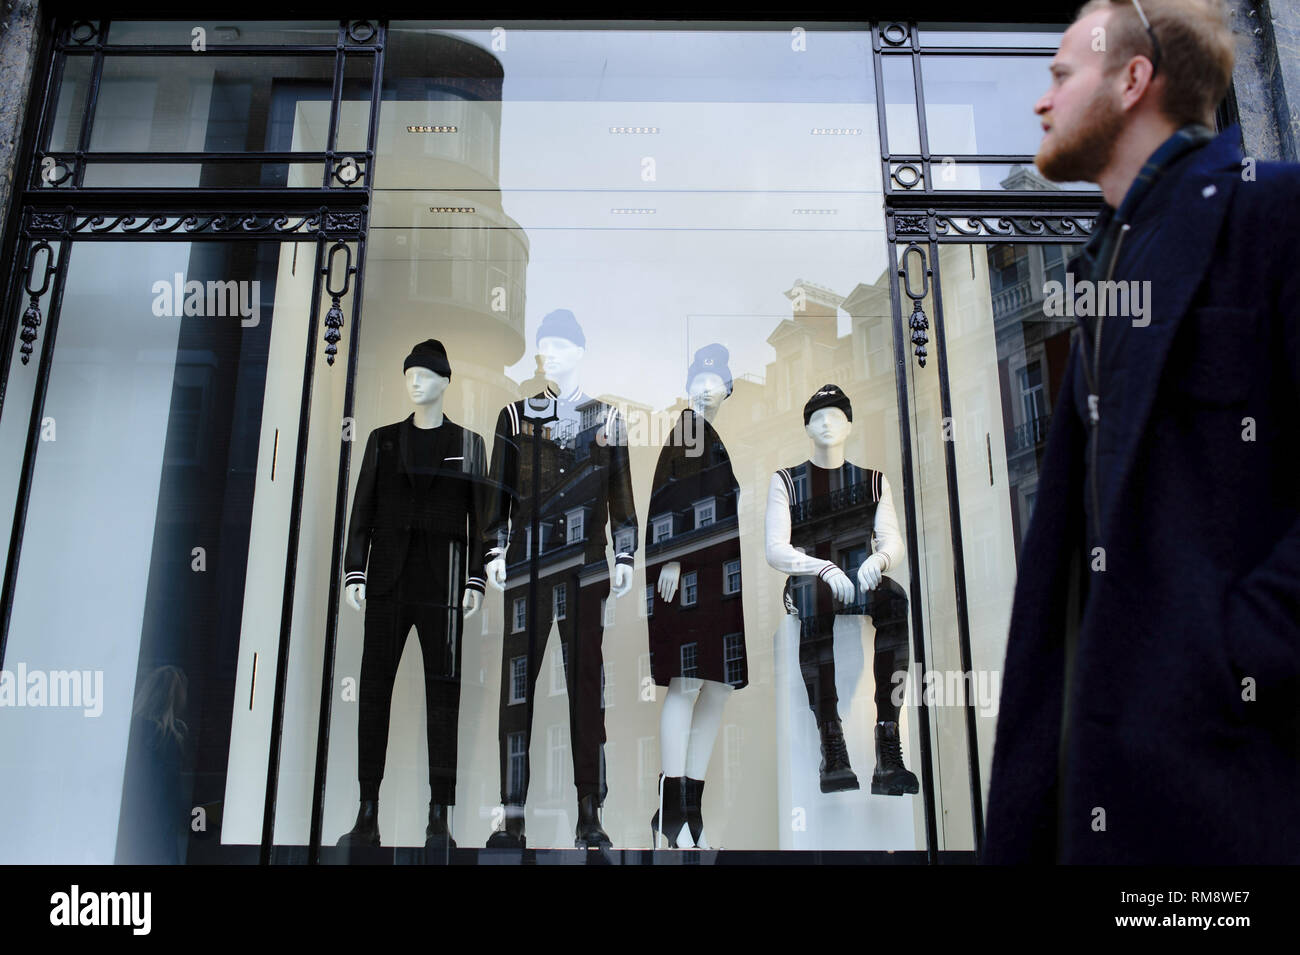 A man seen walking past mannequins in the window of a clothing store on Conduit Street in central London.  February 15 sees the release of the first monthly retail sales figures of the year (for January) from the UK's Office for National Statistics. December figures revealed a 0.9 percent fall in sales from the month before, which saw a 1.4 percent rise widely attributed to the impact of 'Black Friday' deals encouraging earlier Christmas shopping. More generally, with a potential no-deal departure from the EU growing nearer and continuing to undermine consumer confidence in the UK, economy-wat Stock Photo